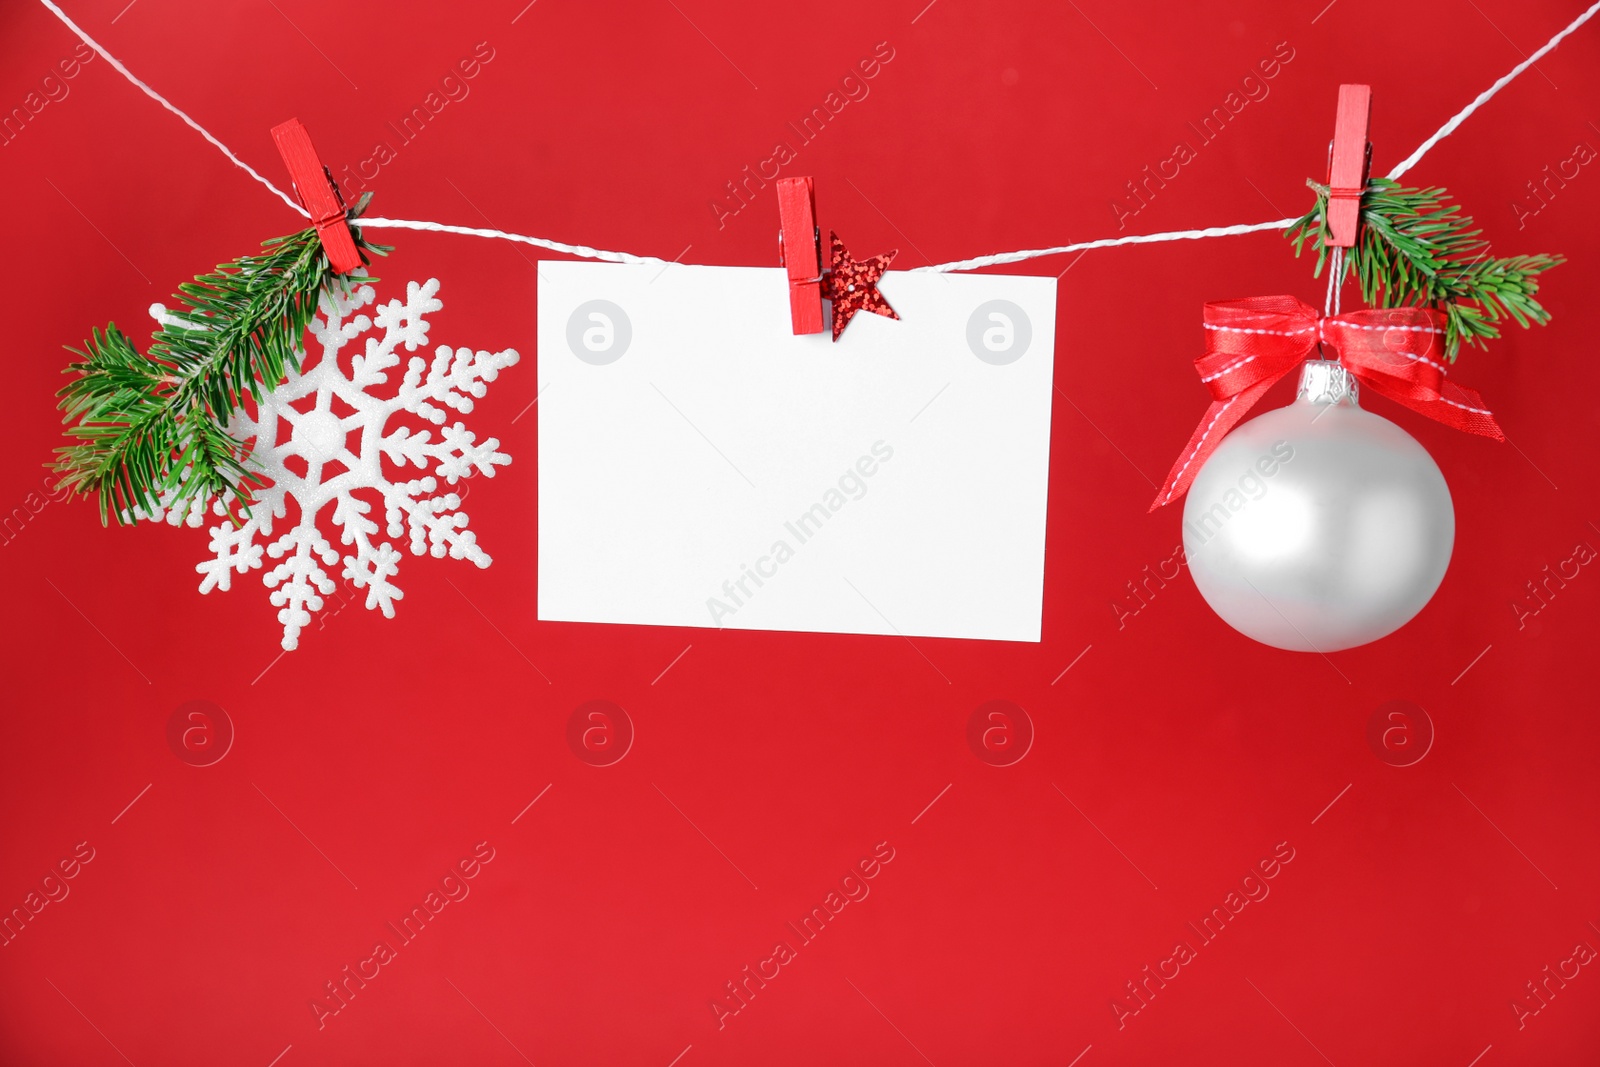 Photo of Blank Christmas card and festive decor on rope against red background, space for text